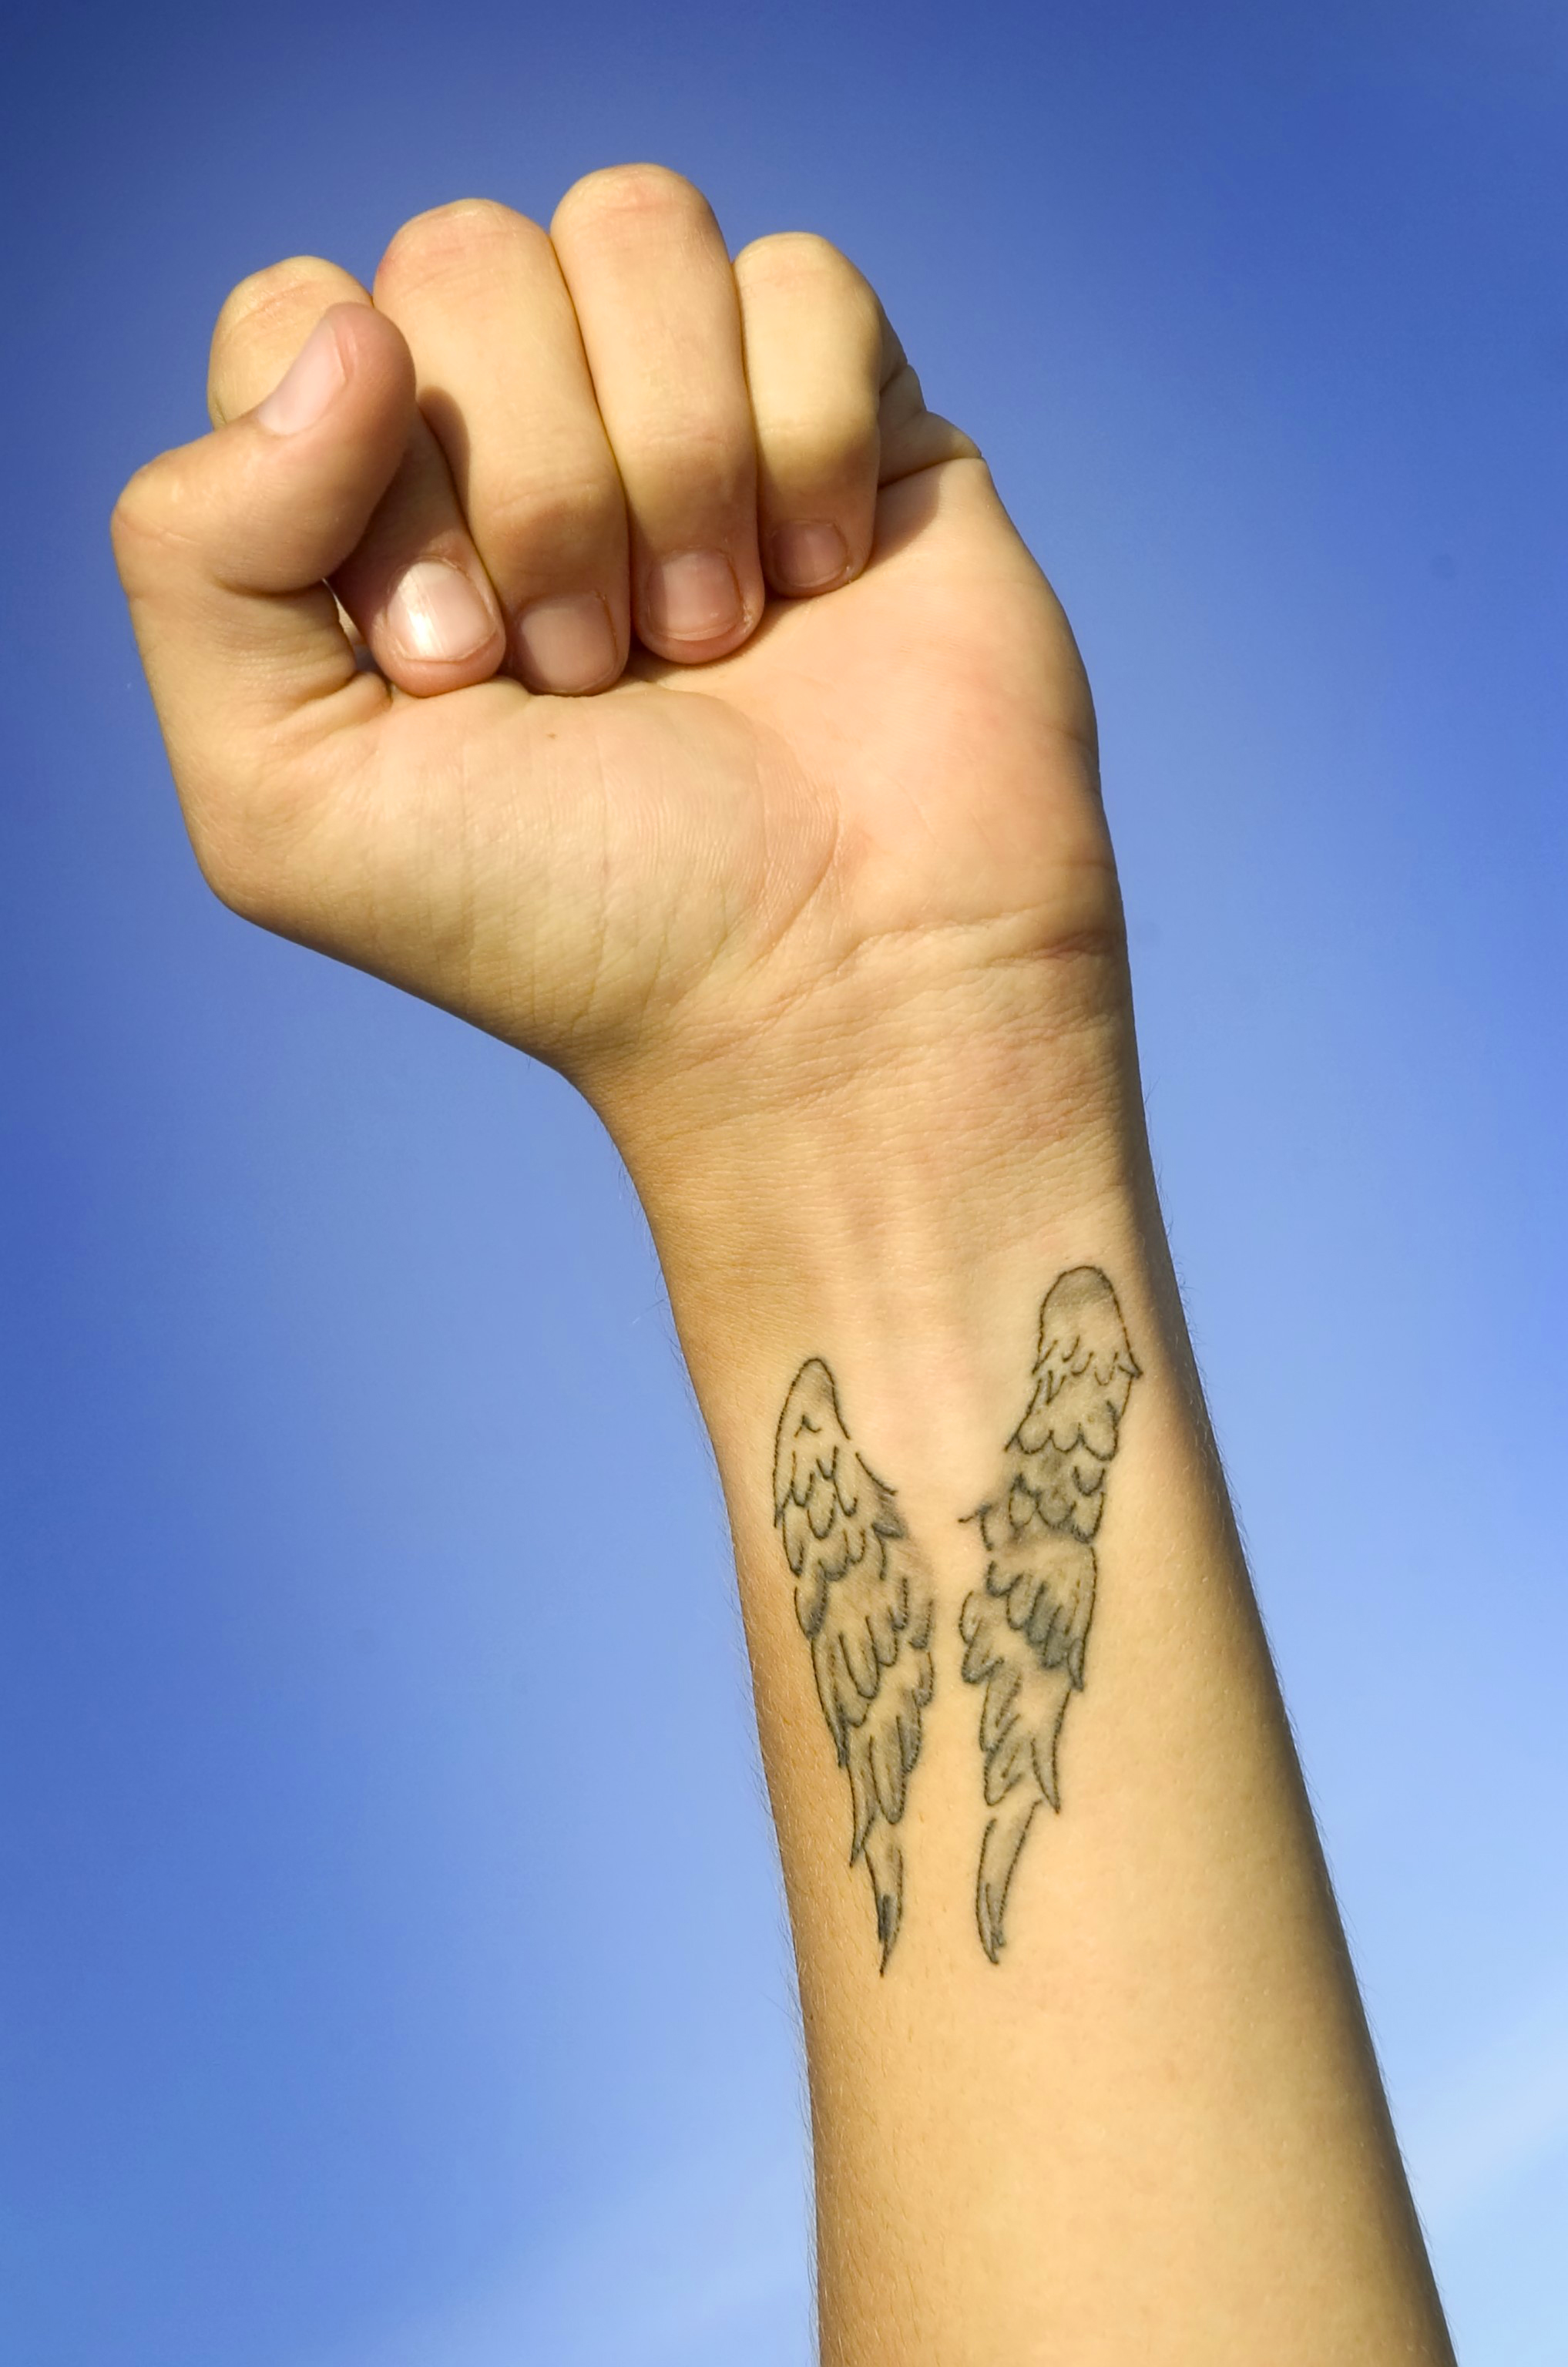 Simple Duck Tattoos That Will Make You Smile - Noon Line Art